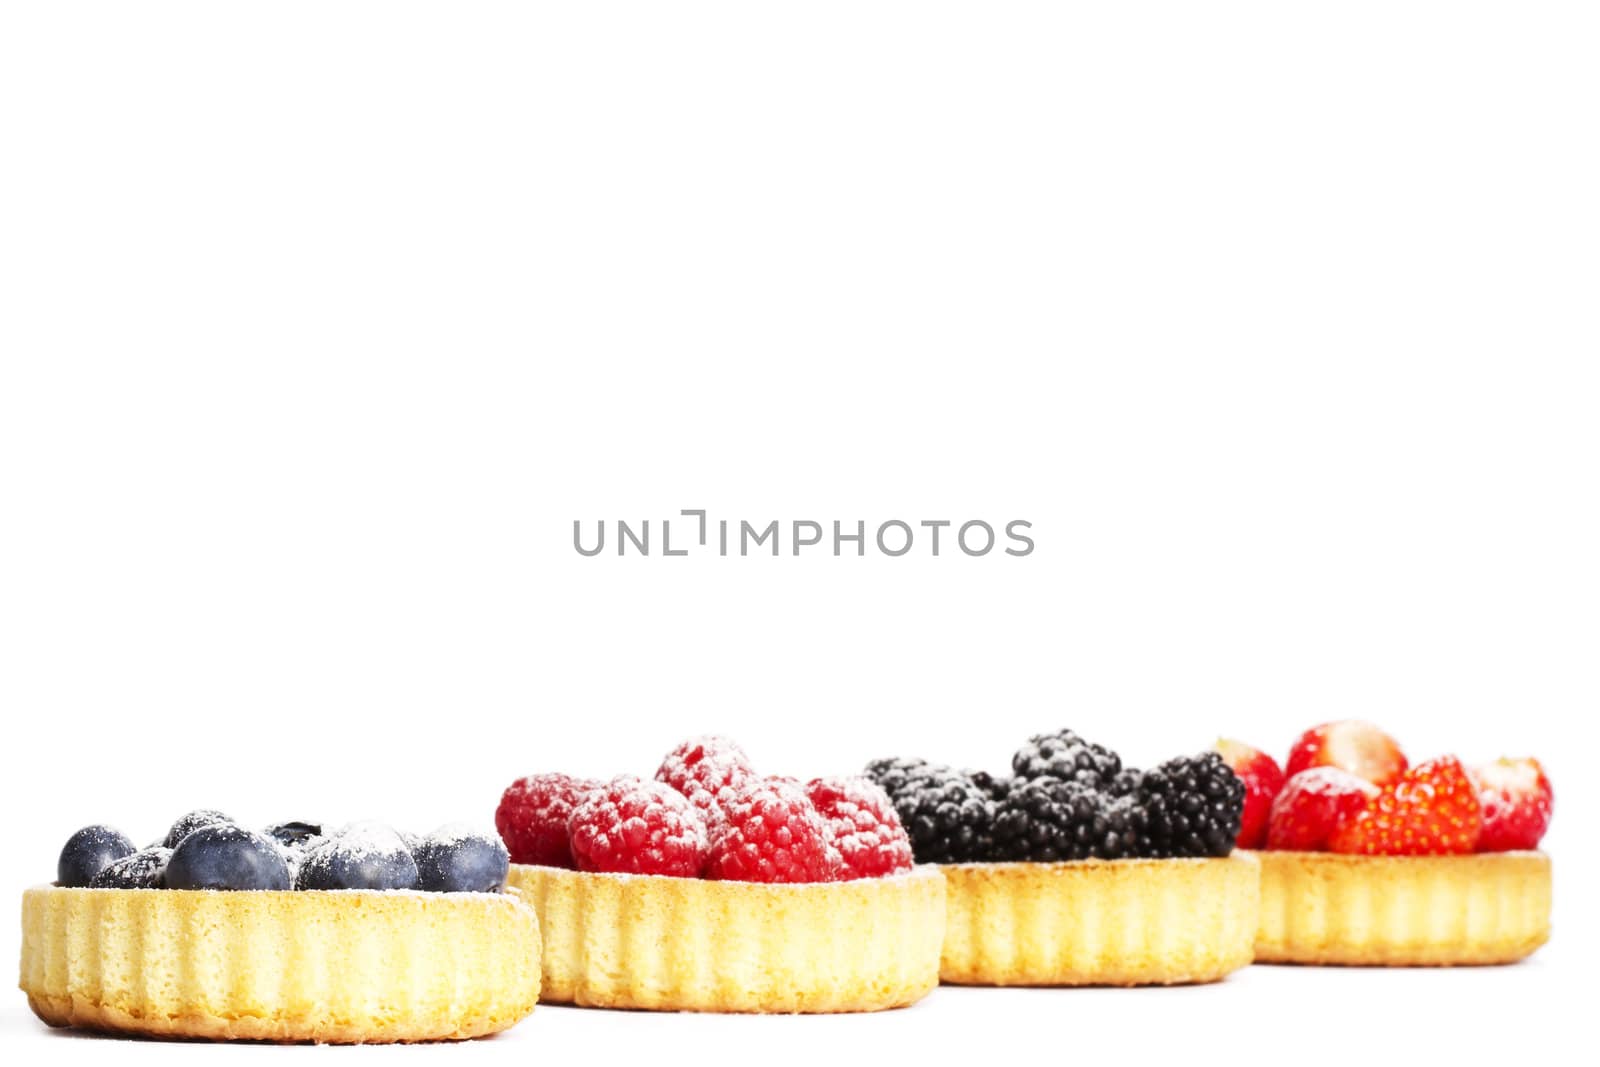 sugar coveres blueberries in front of wild berries in tartlets on white background